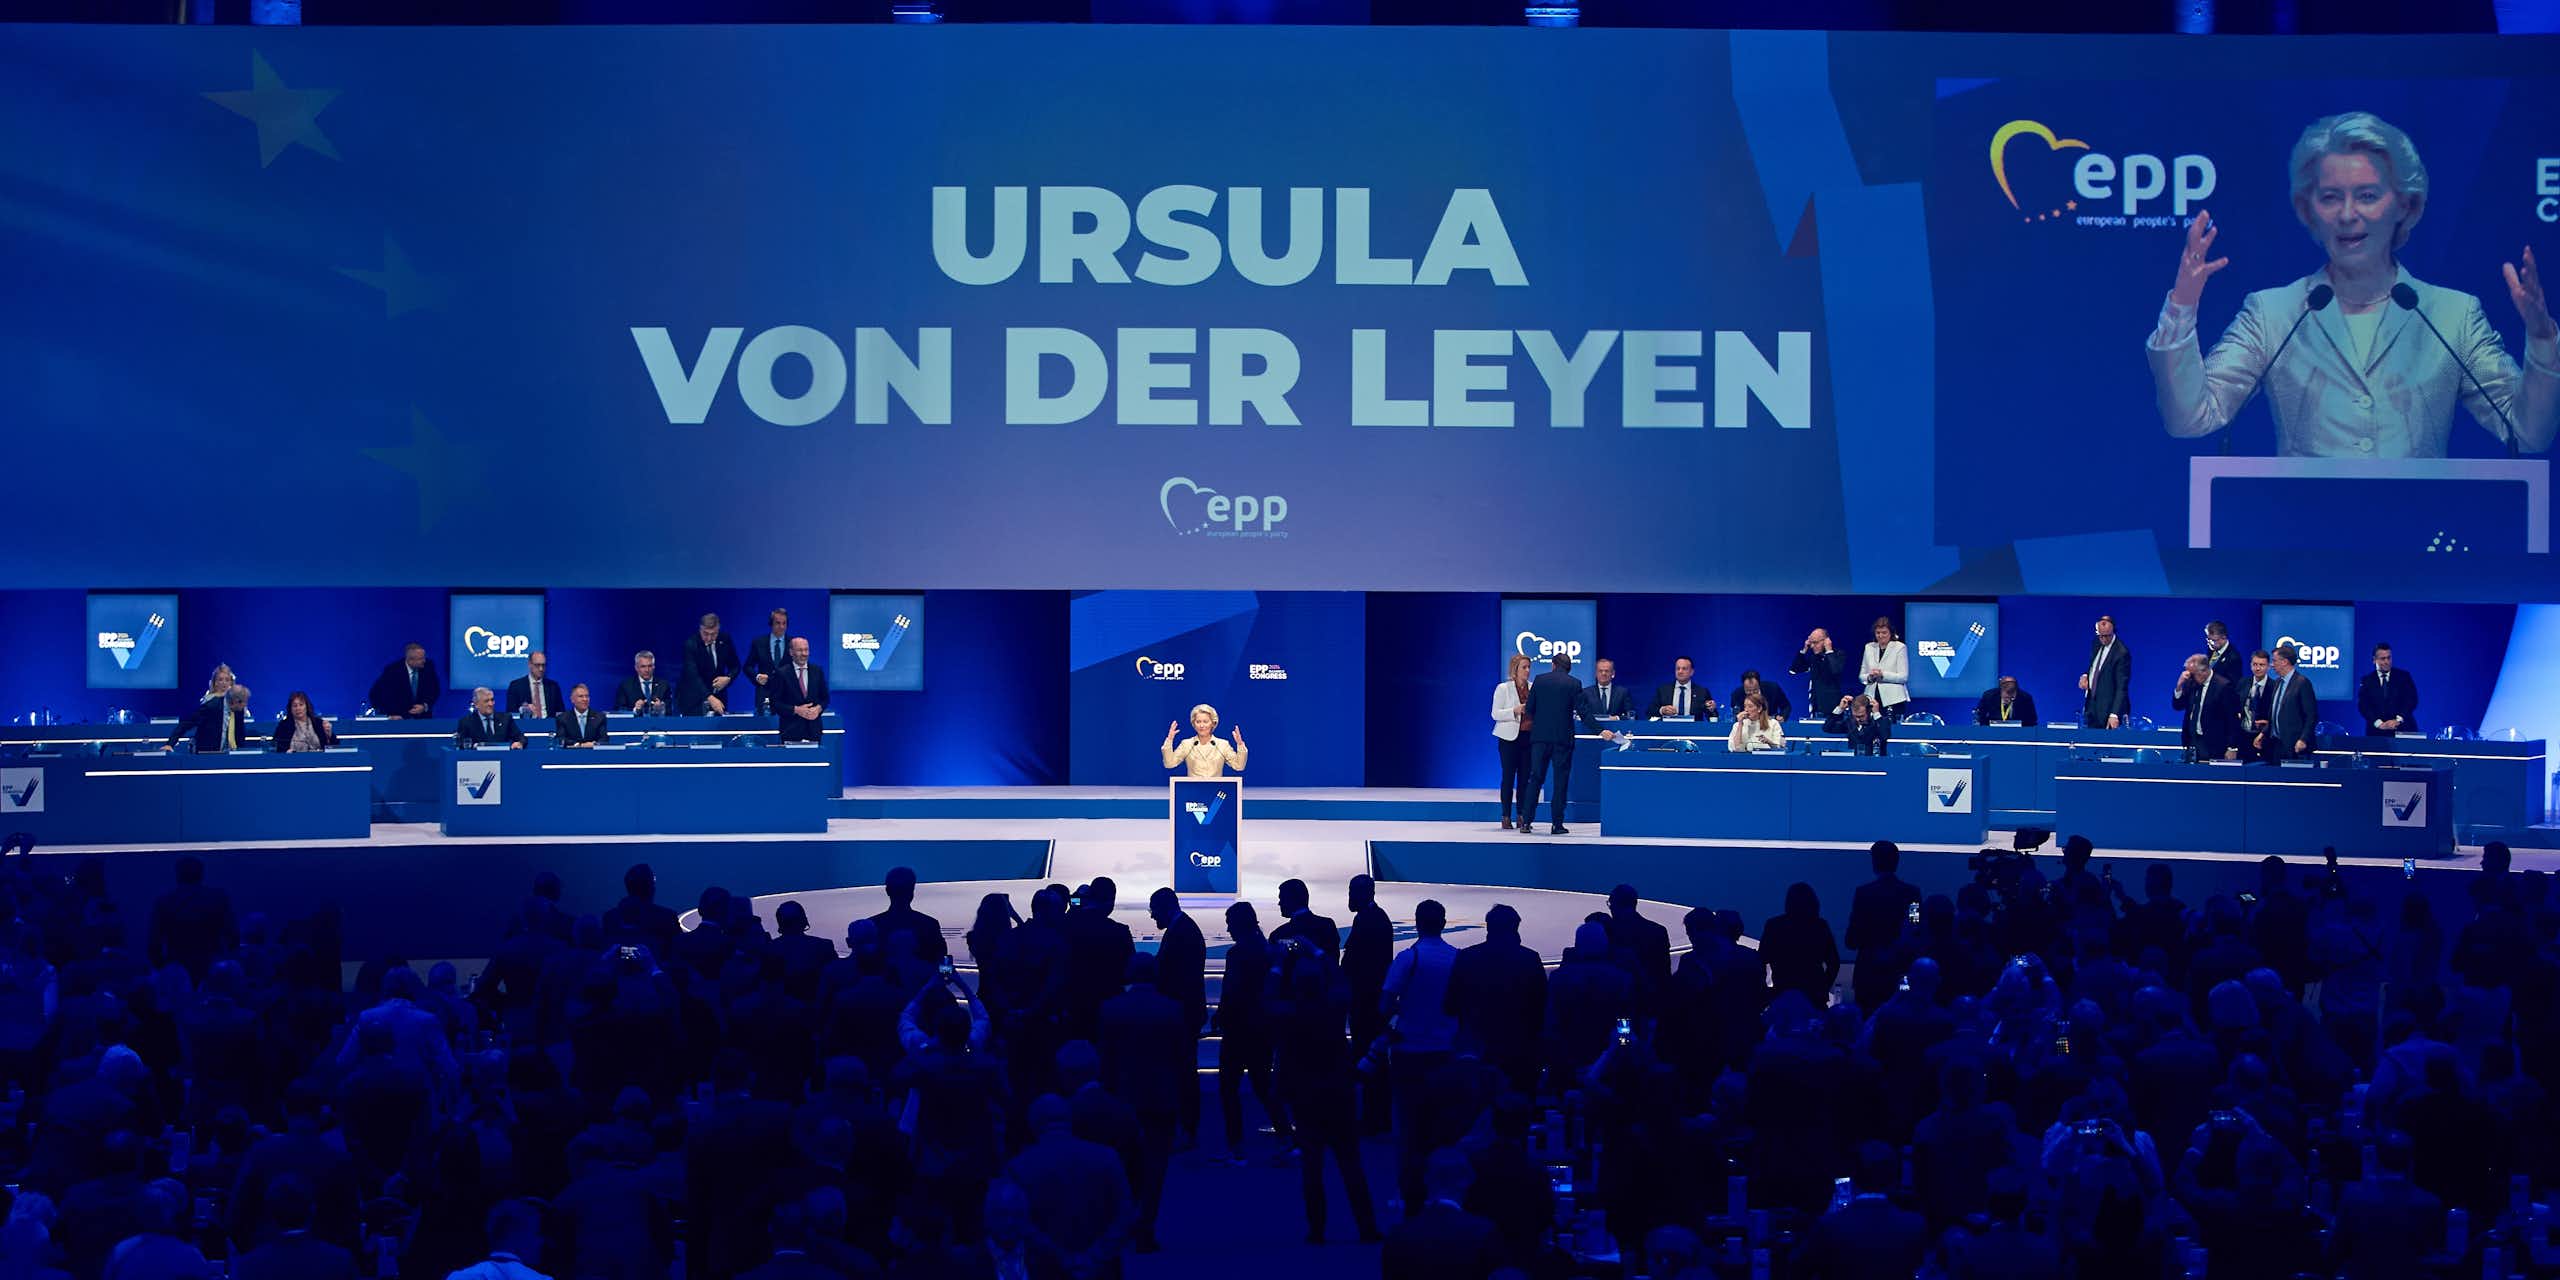 Ursula von der Leyen being announced as the European People's party lead candidate for the European Parliament elections.